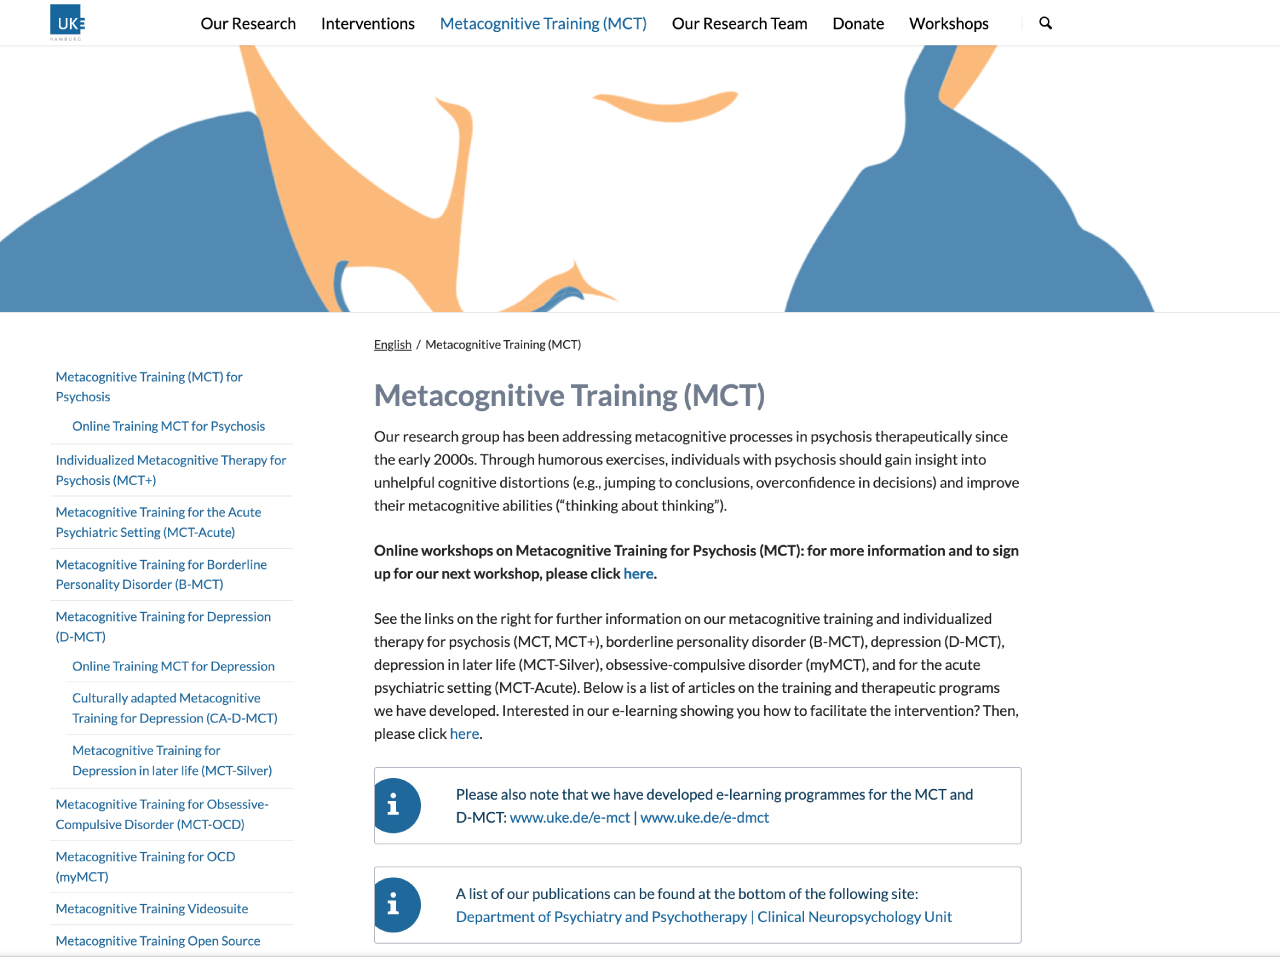 Metacognitive Training (MCT)